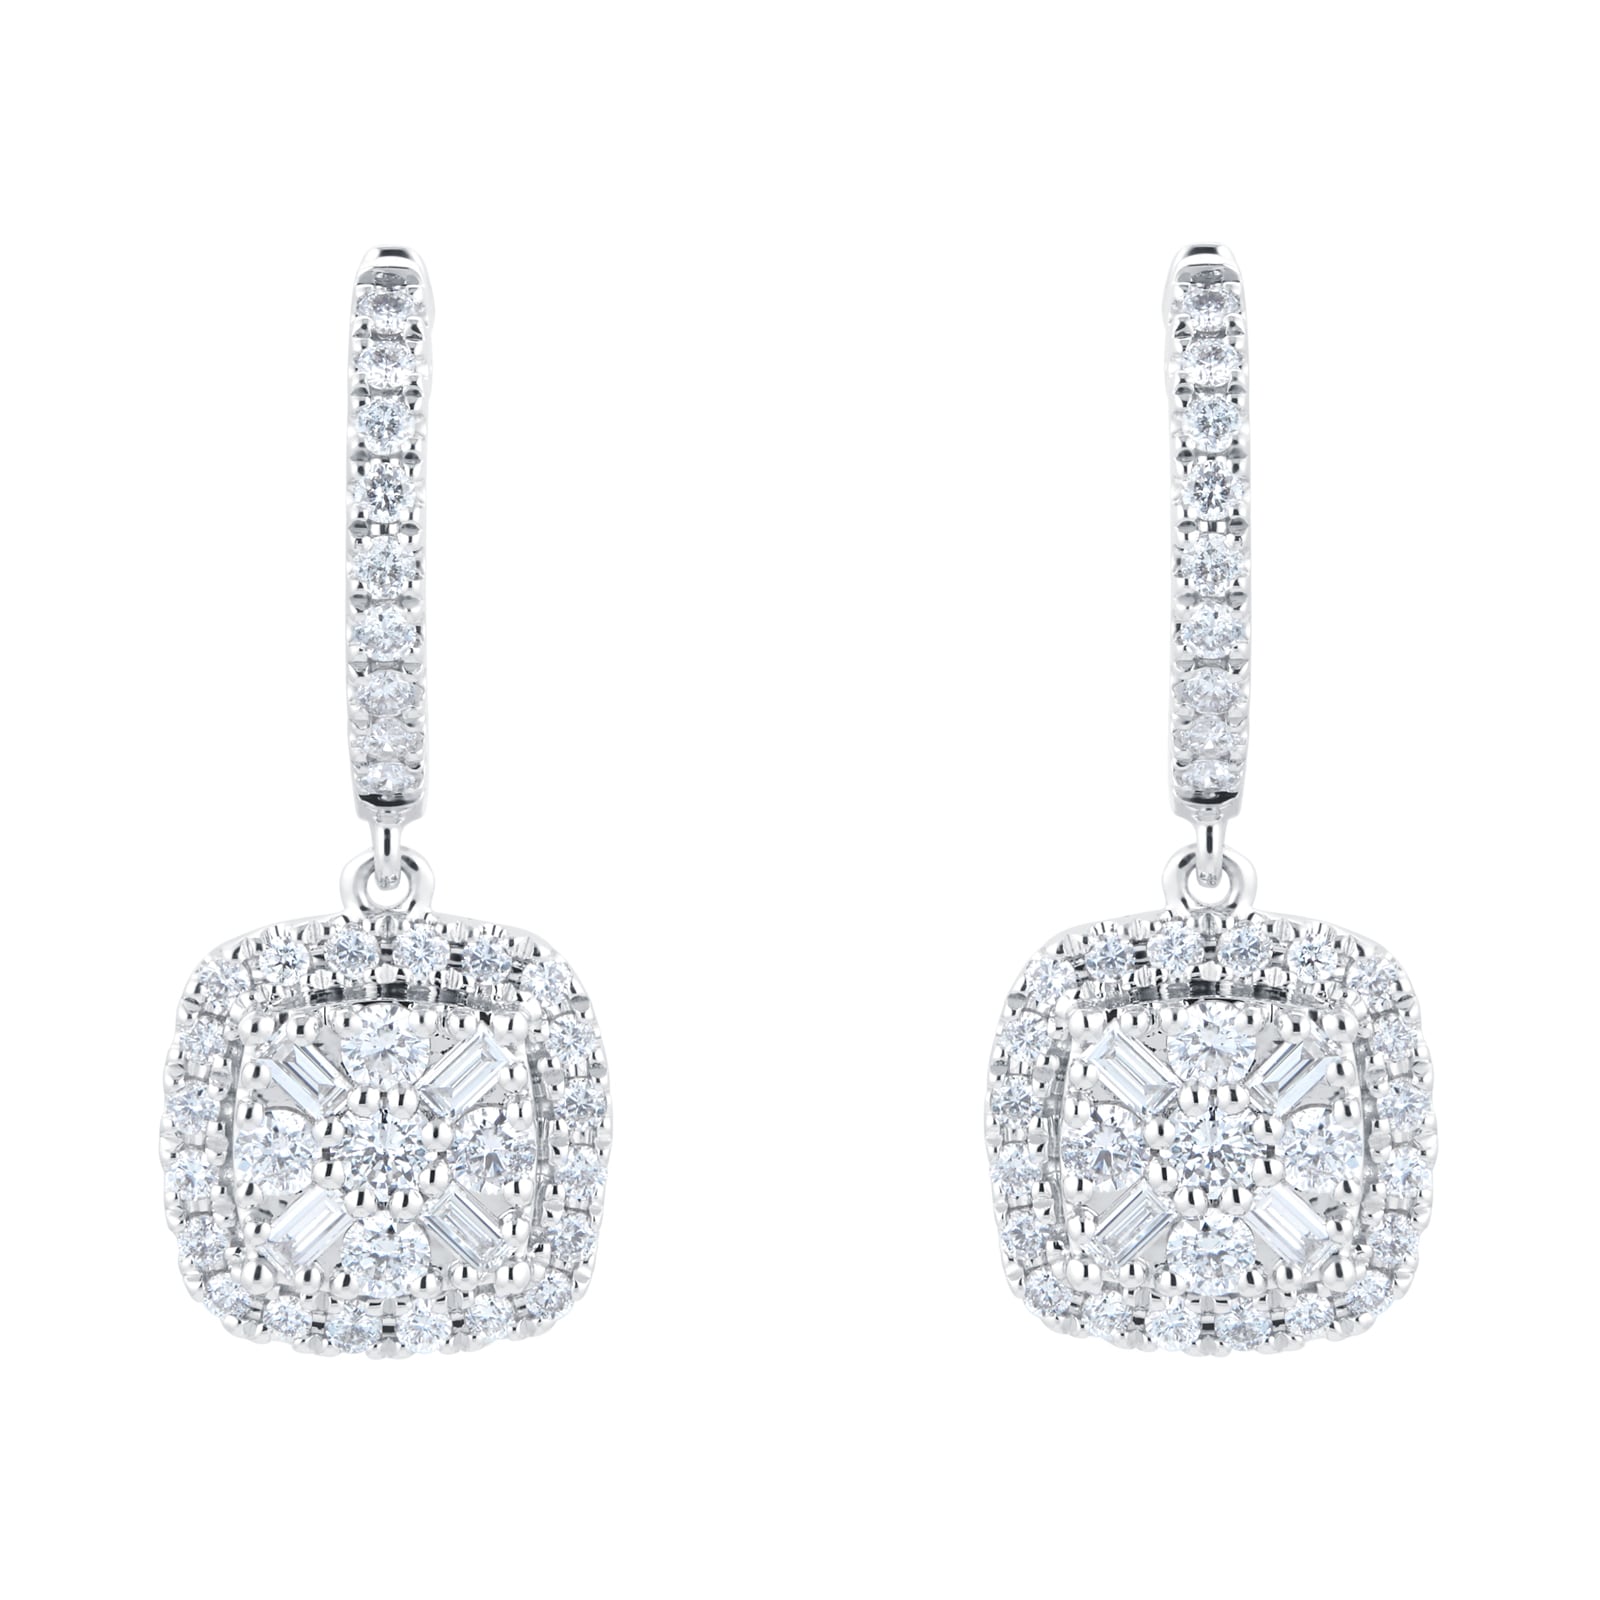 Chanel Set Baguettes Bordered by Round Cut Diamonds Hanging Earings